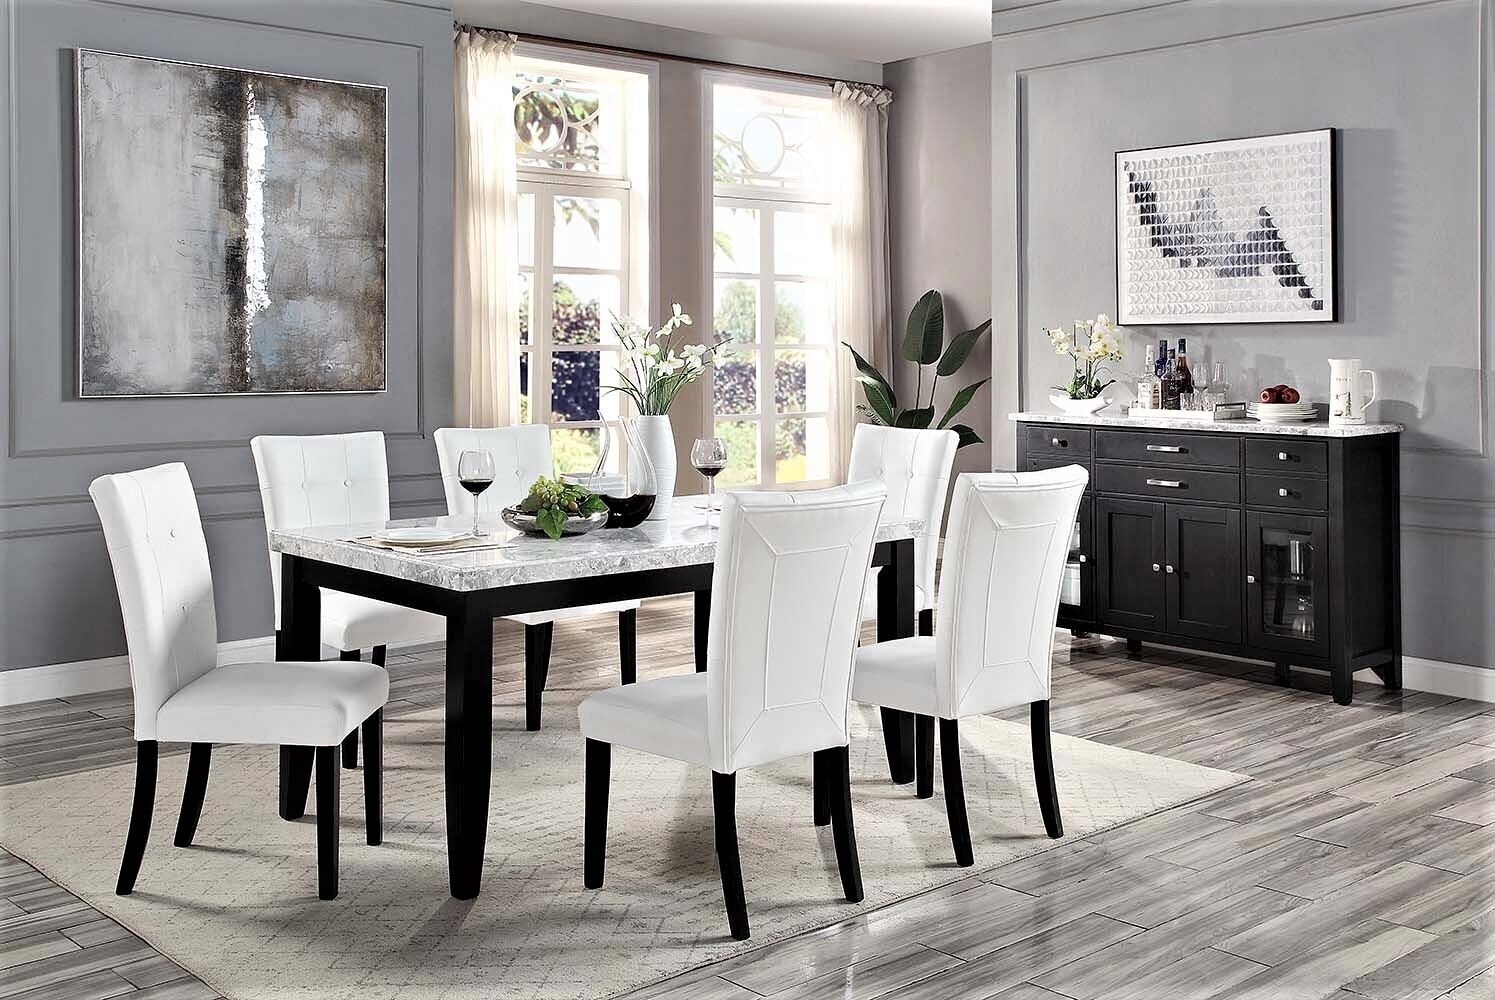 Esofastore Contemporary White Finish Dining 7pc Set Marble Top Table and Button-Tufted 6 Side Chairs Modern Dining Furniture